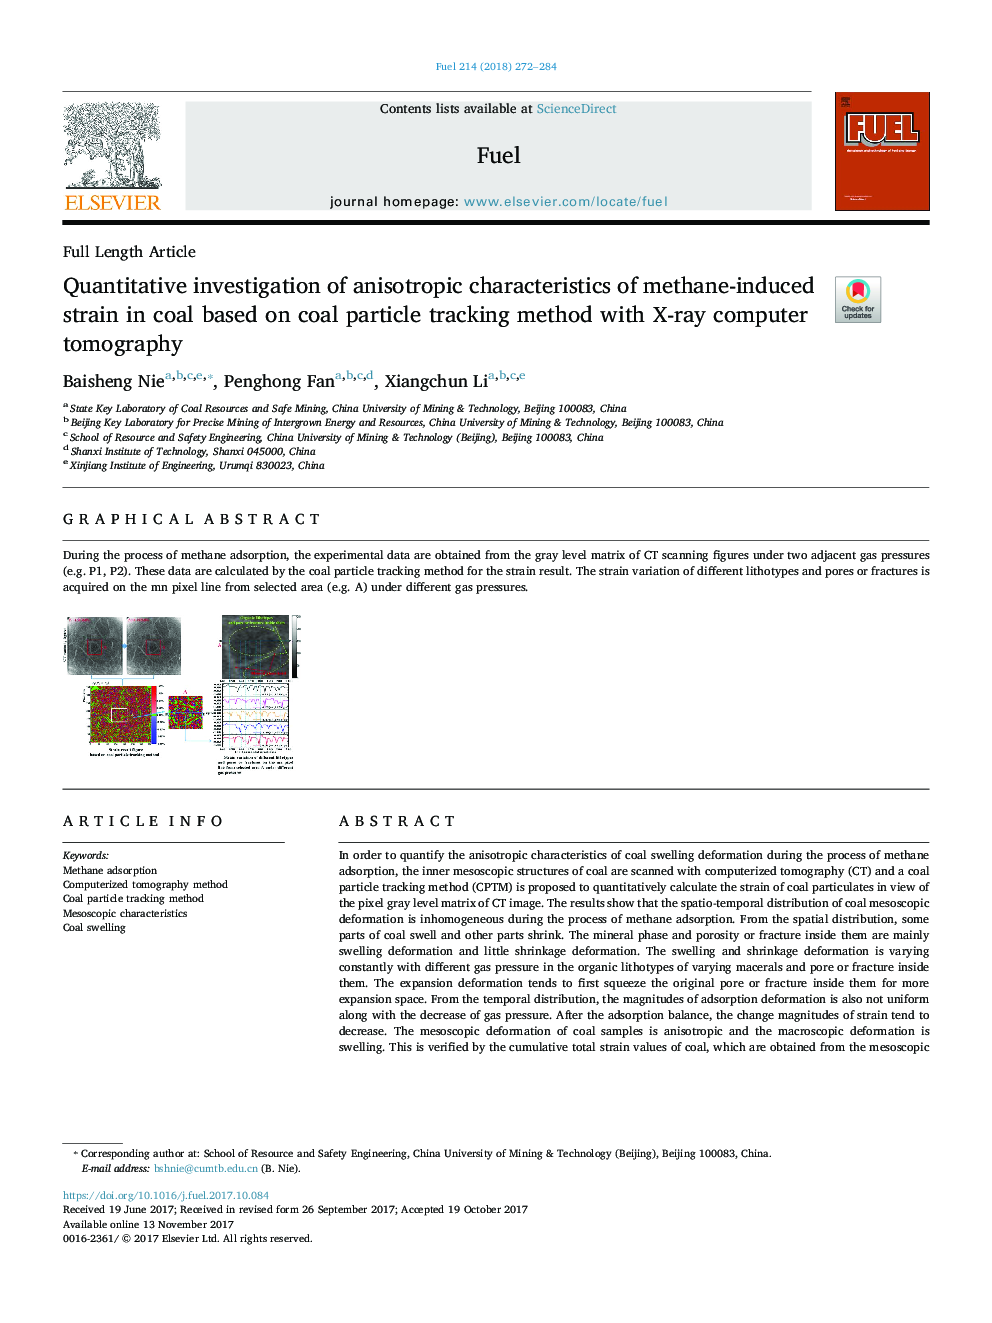 Quantitative investigation of anisotropic characteristics of methane-induced strain in coal based on coal particle tracking method with X-ray computer tomography